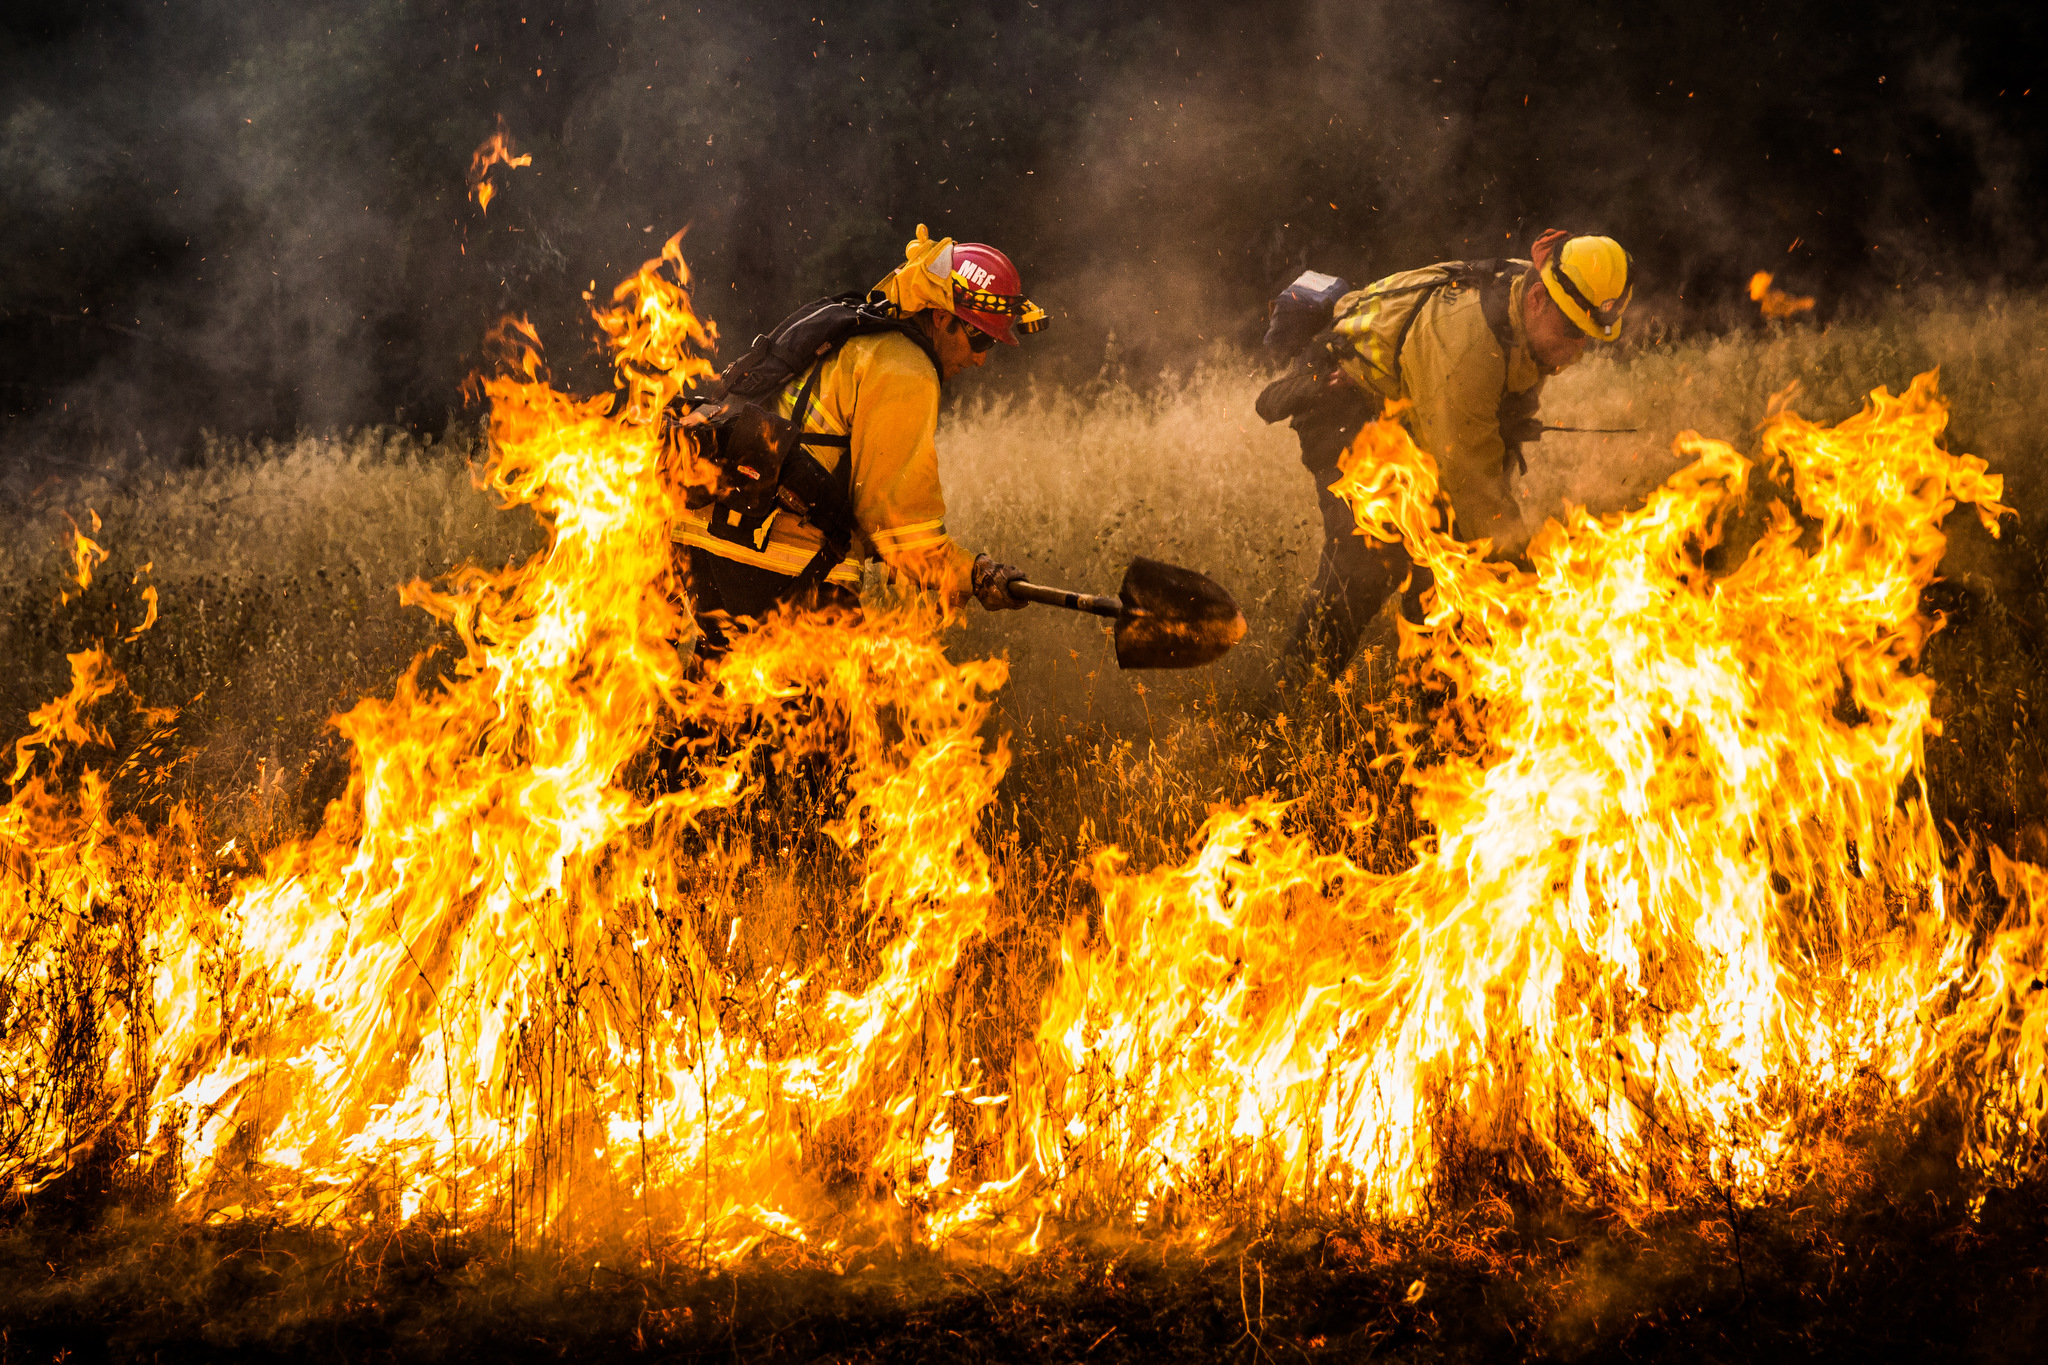  Firefighters dig a fire line around a spot fire on the Rocky Fire in Lake County, California on July 30, 2015. As of August 5, the fire had consumed 69,600 acres and is one of 23 wildfires burning in California. 